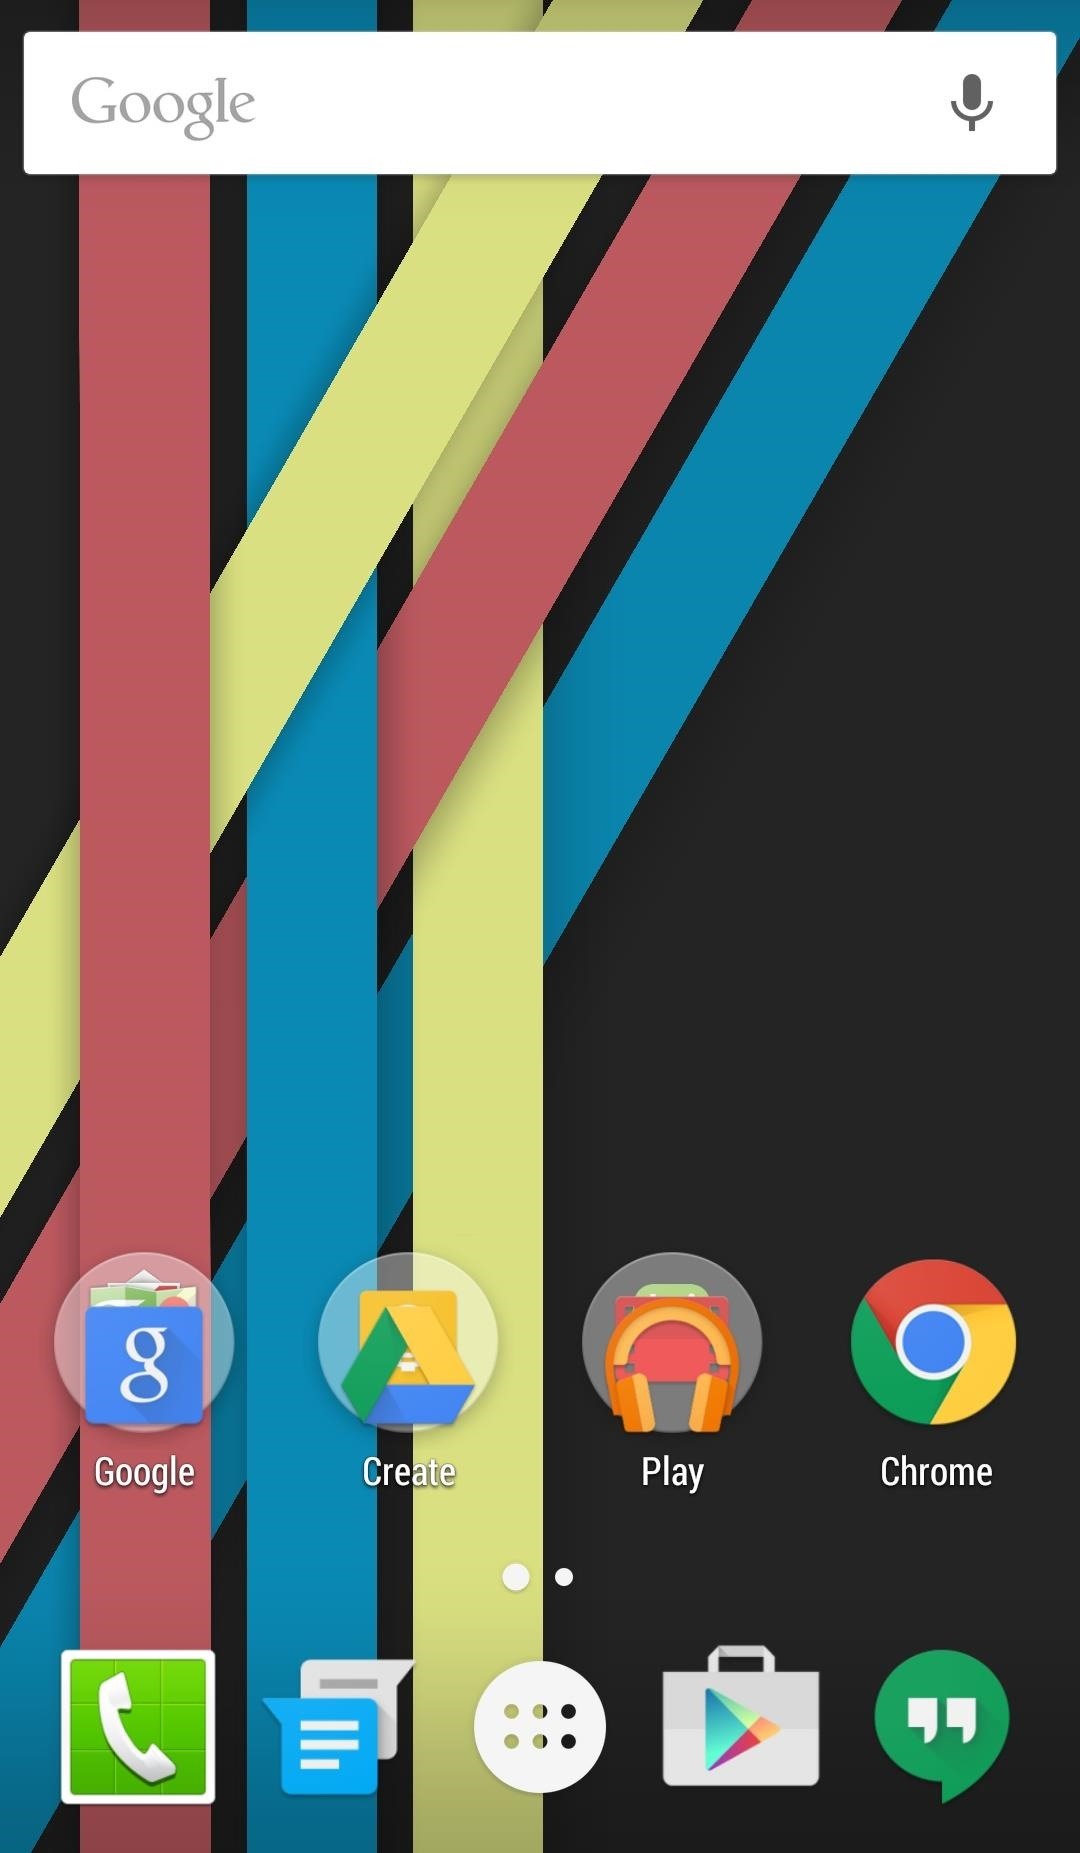 New Google Now Launcher Makes Your Old Android Feel Like It’s Running Lollipop